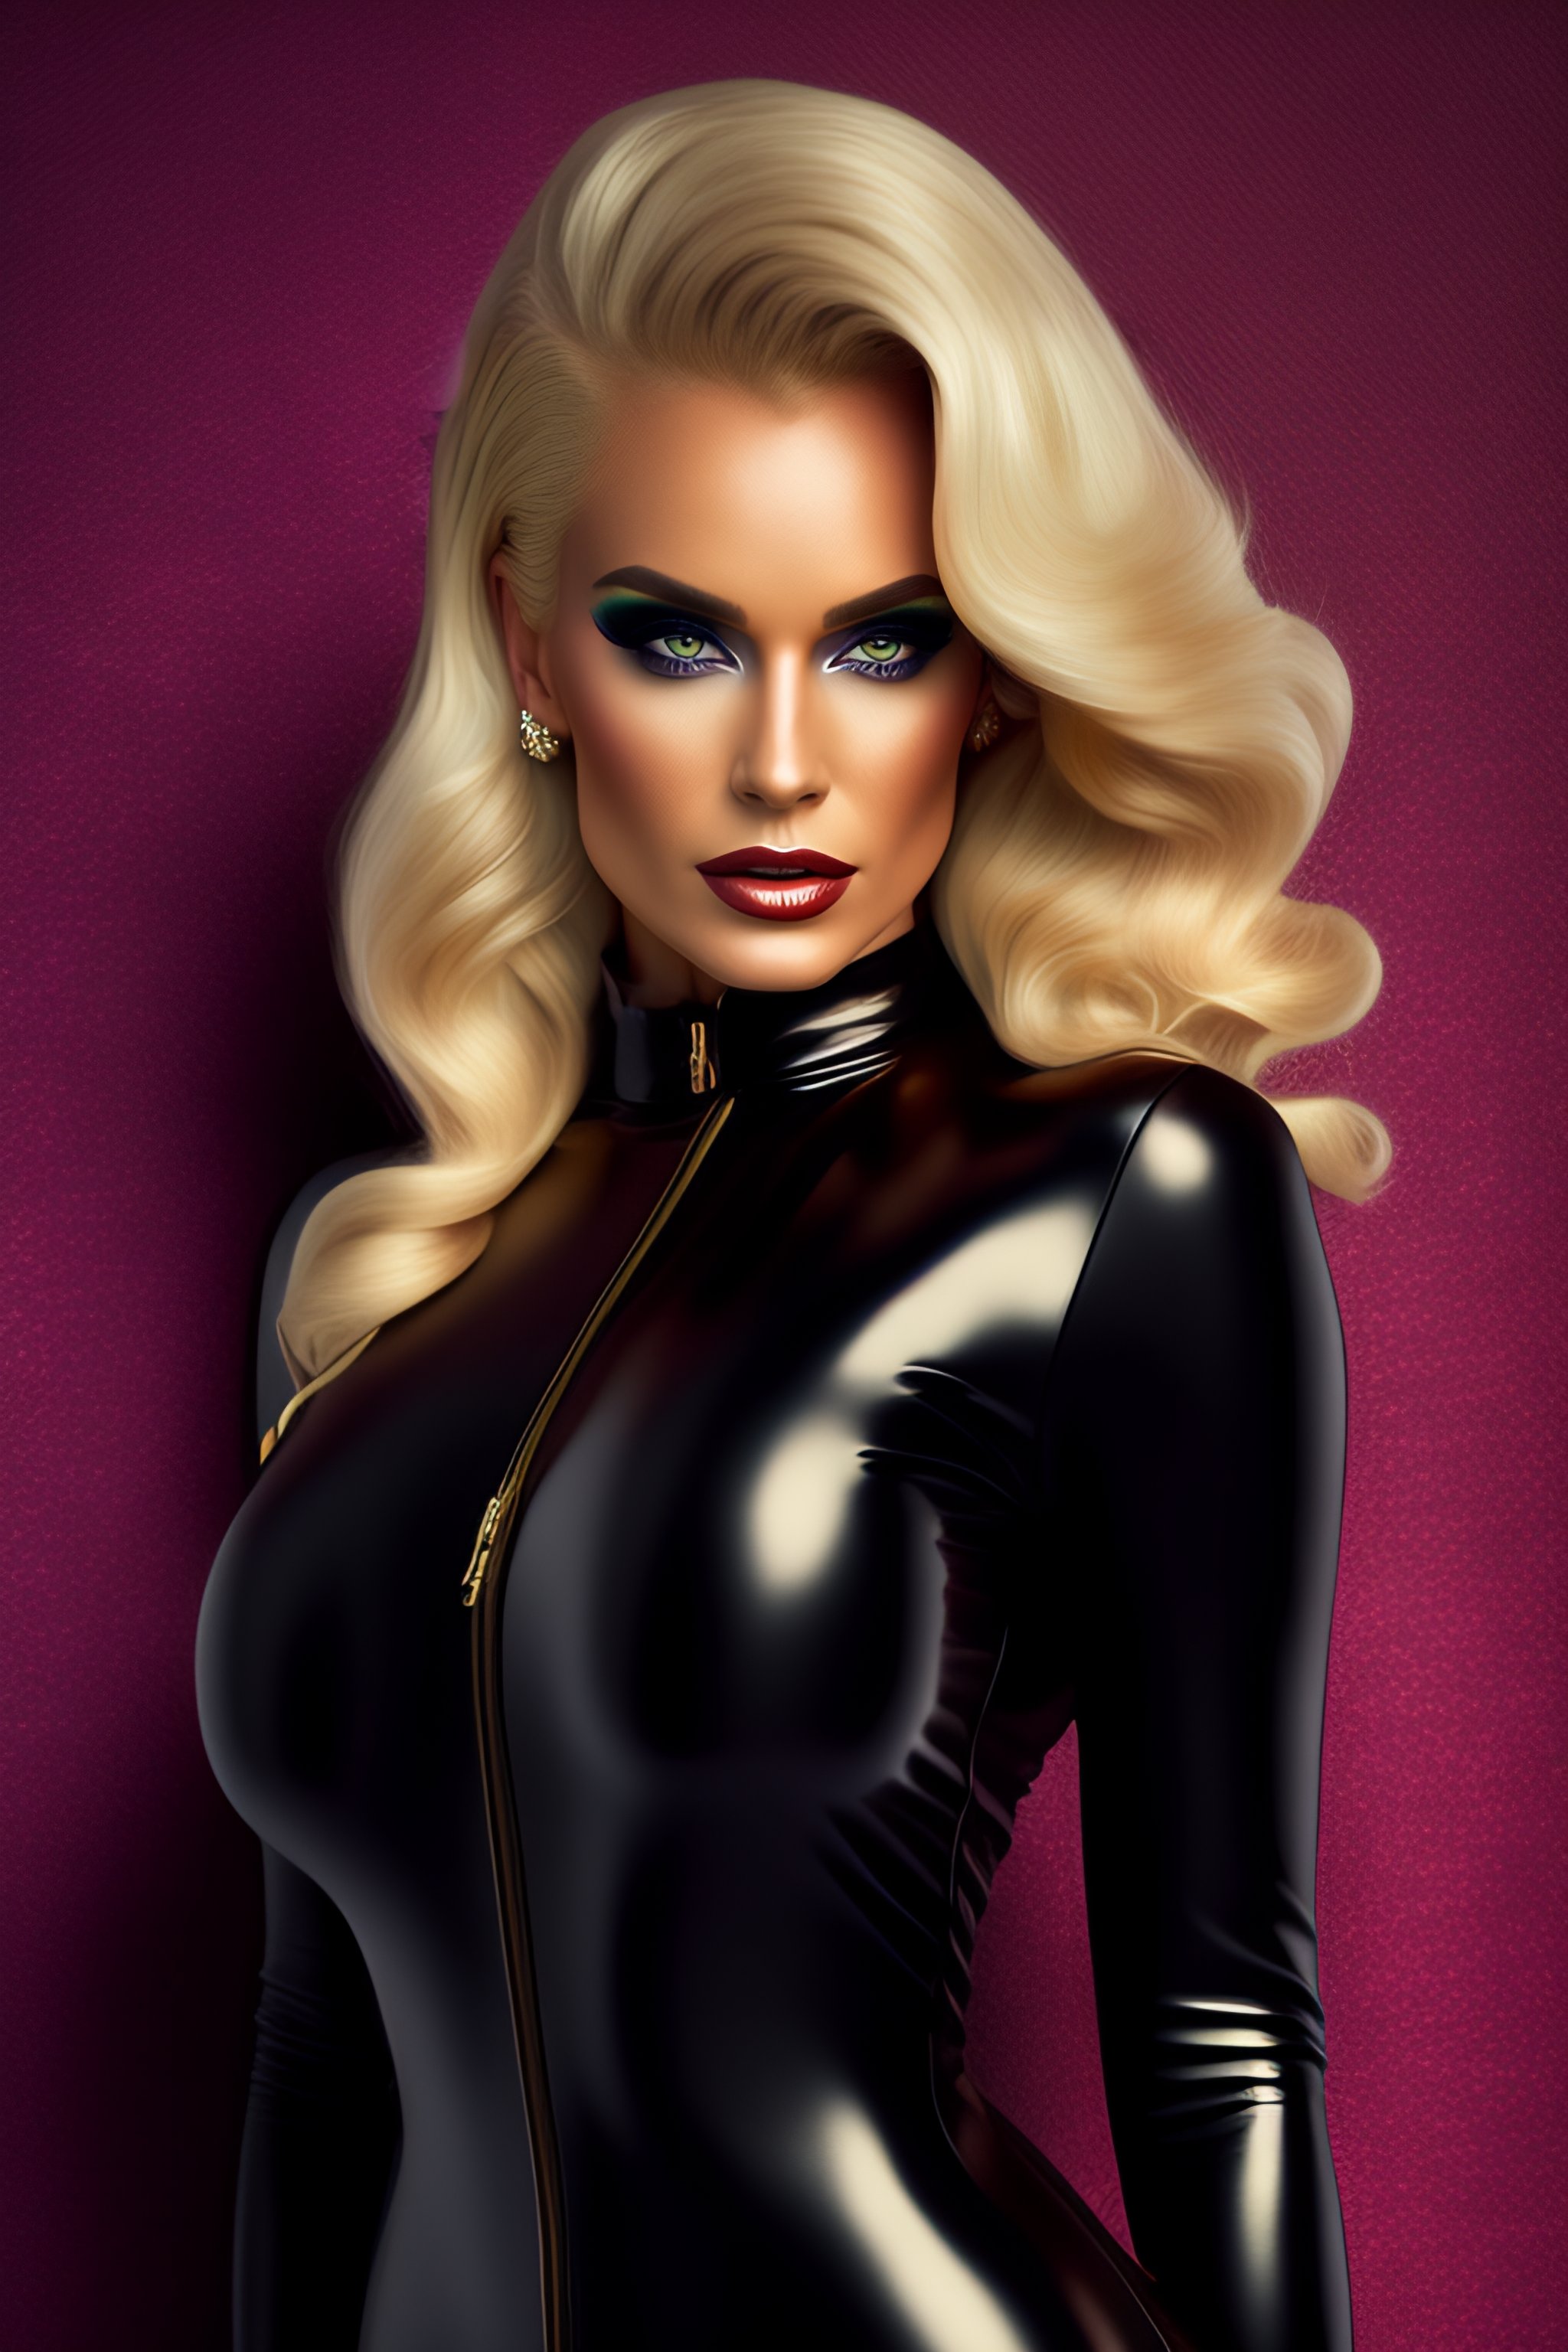 Lexica - Hot blonde with blue eyes, black latex full body suit